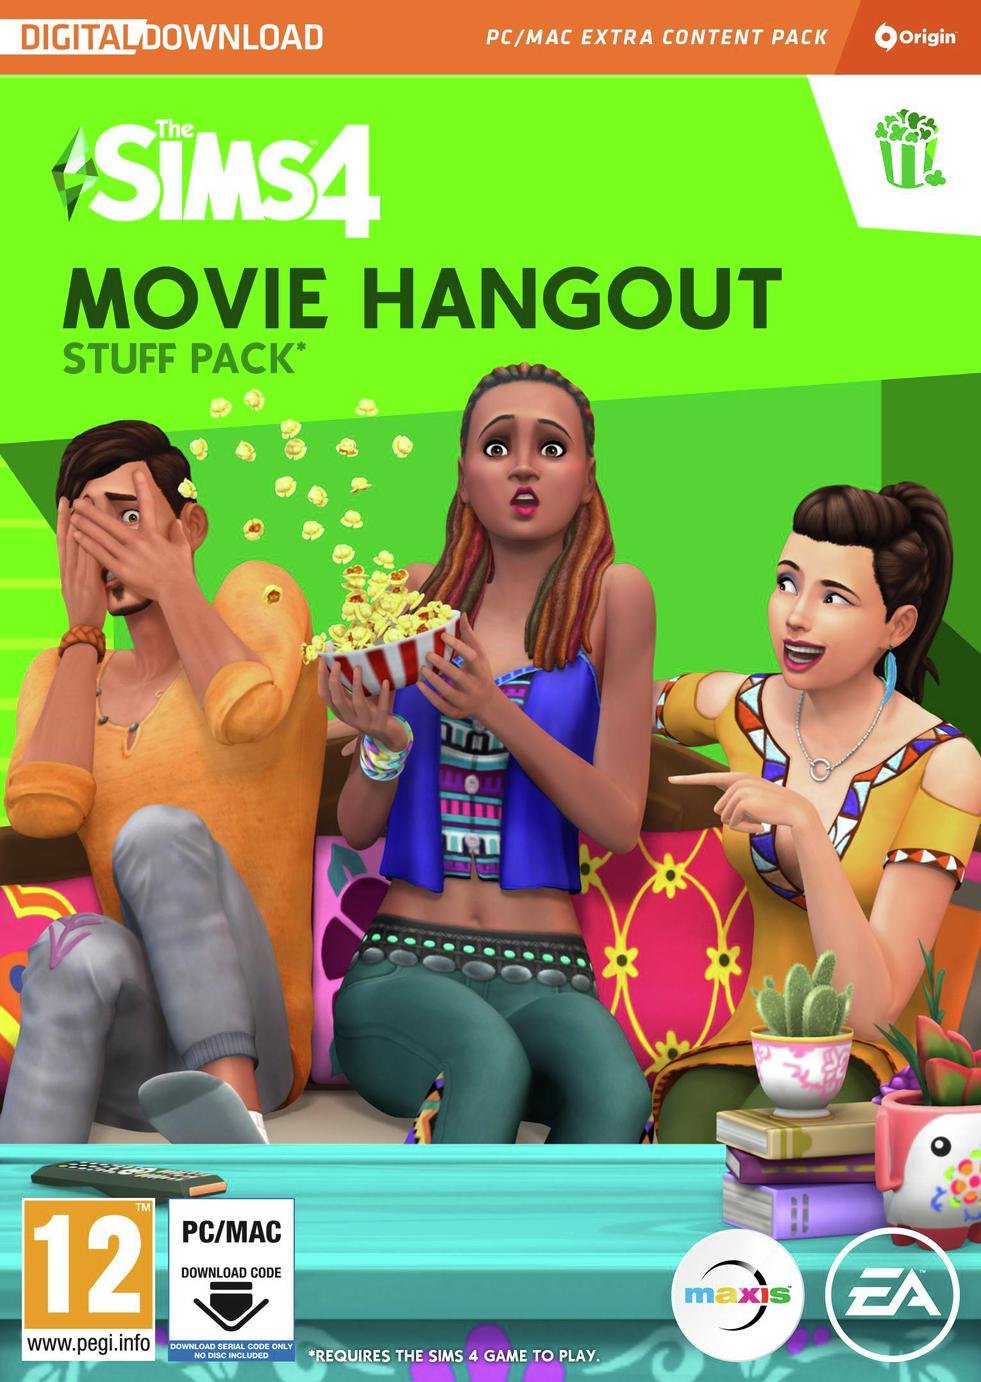 The Sims 4 Movie Hangout Stuff Pack PC Game